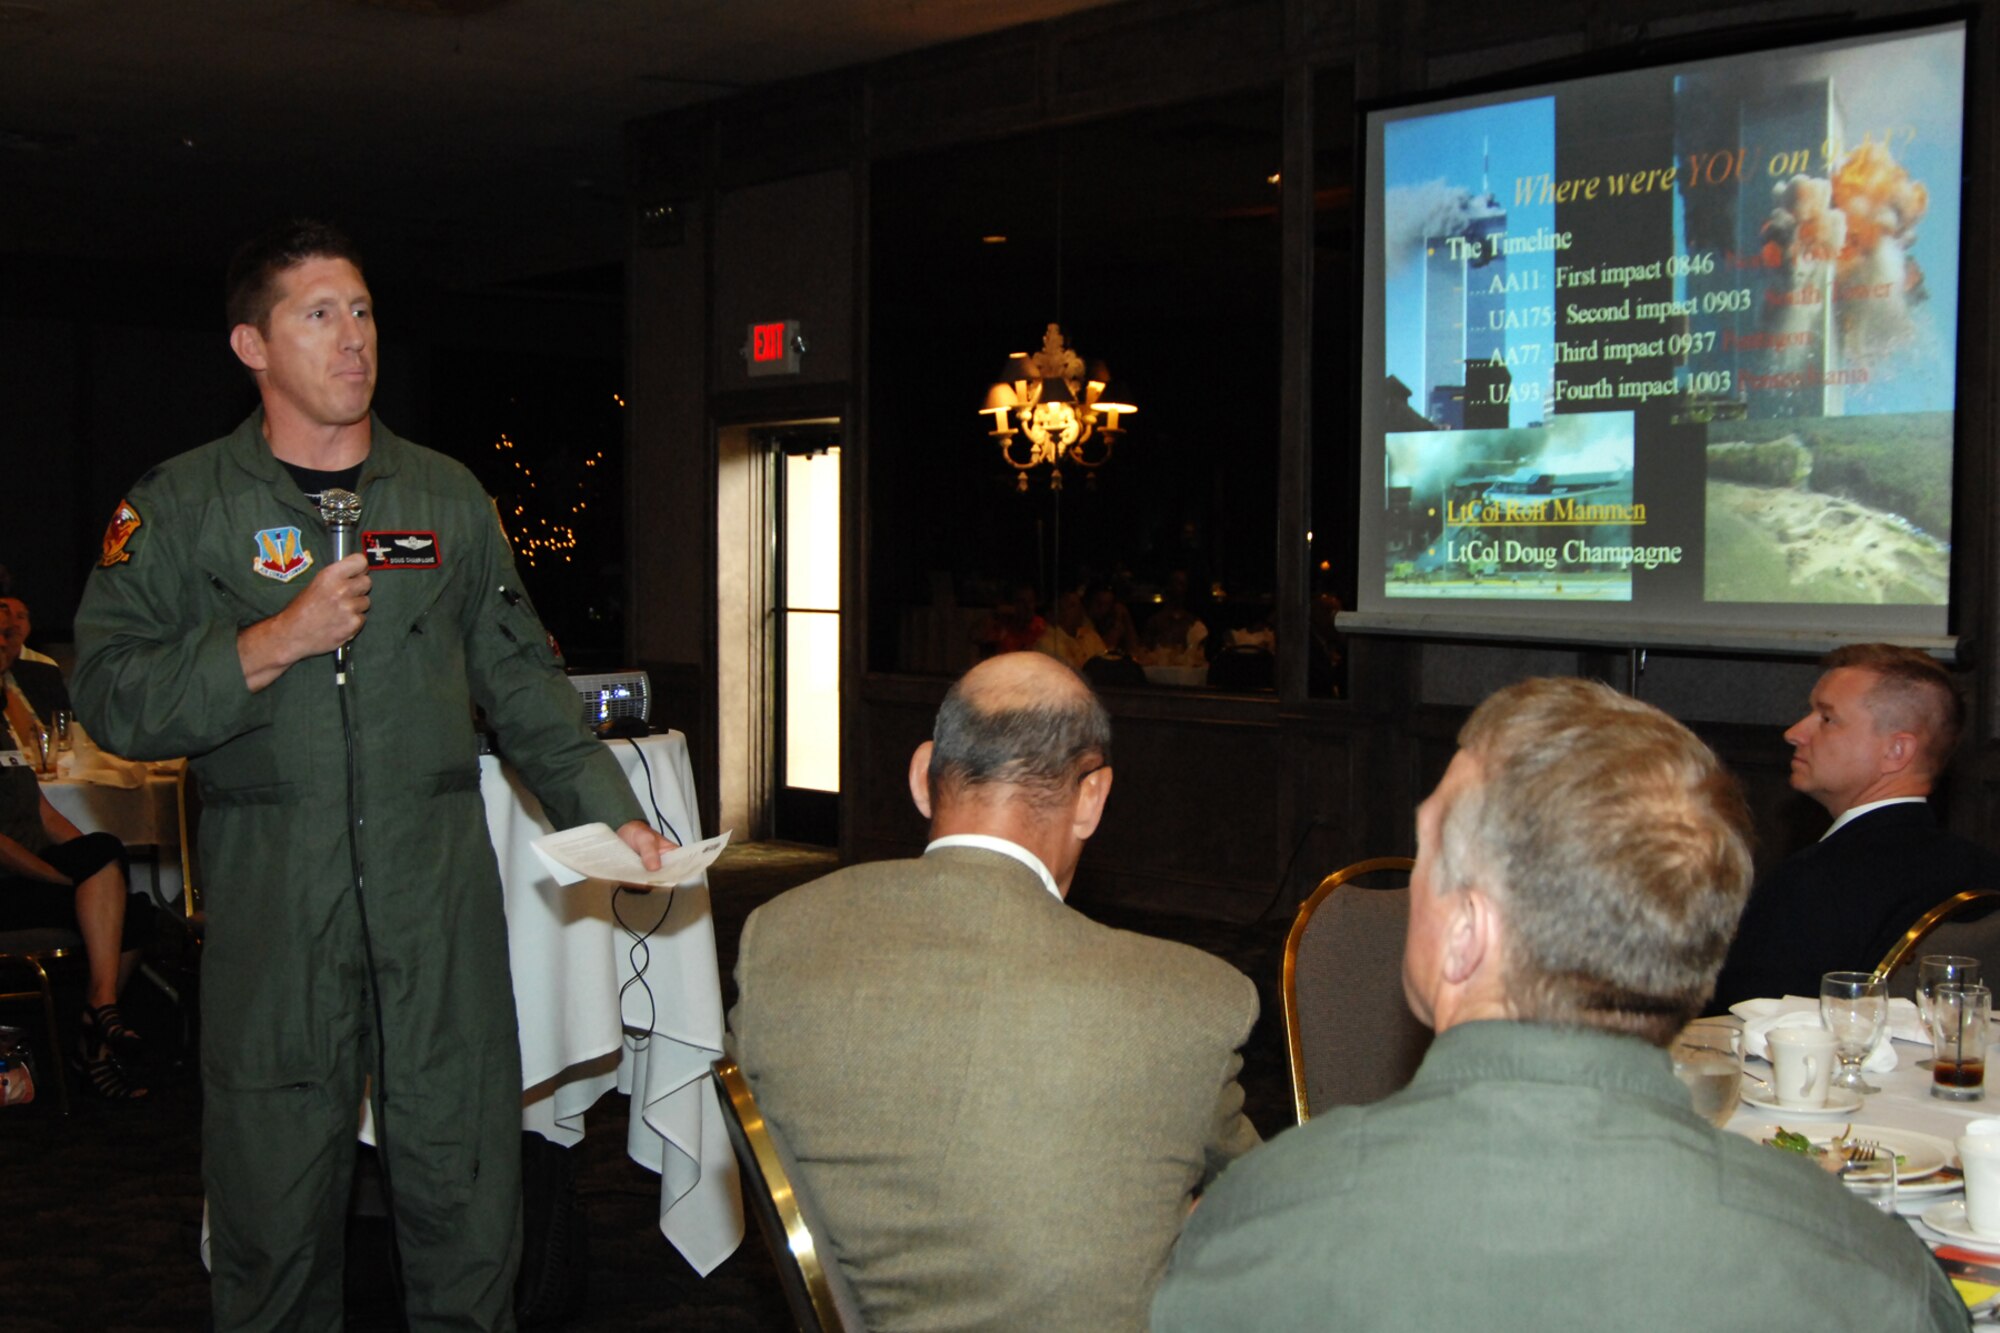 Lt. Col. Doug Champagne, commander of the 107th Fighter Squadron, Selfridge Air National Guard Base, Mich., recalls his experiences on Sept. 11, 2001, during a June 21, 2011, meeting of the Selfridge Base Community Council. Champagne was airborne in an F-16 Falcon, returning from a morning target practice mission, when the terror attacks occured. At far right is Lt, Col. Rolf Mammen, also a pilot with the Michigan Air National Guard, wore his United Airlines pilot uniform to the meeting and recalled his experiences that day flying in a United airliner, bound for New York. (USAF photo by Rachel Barton, 127th Wing Public Affairs)